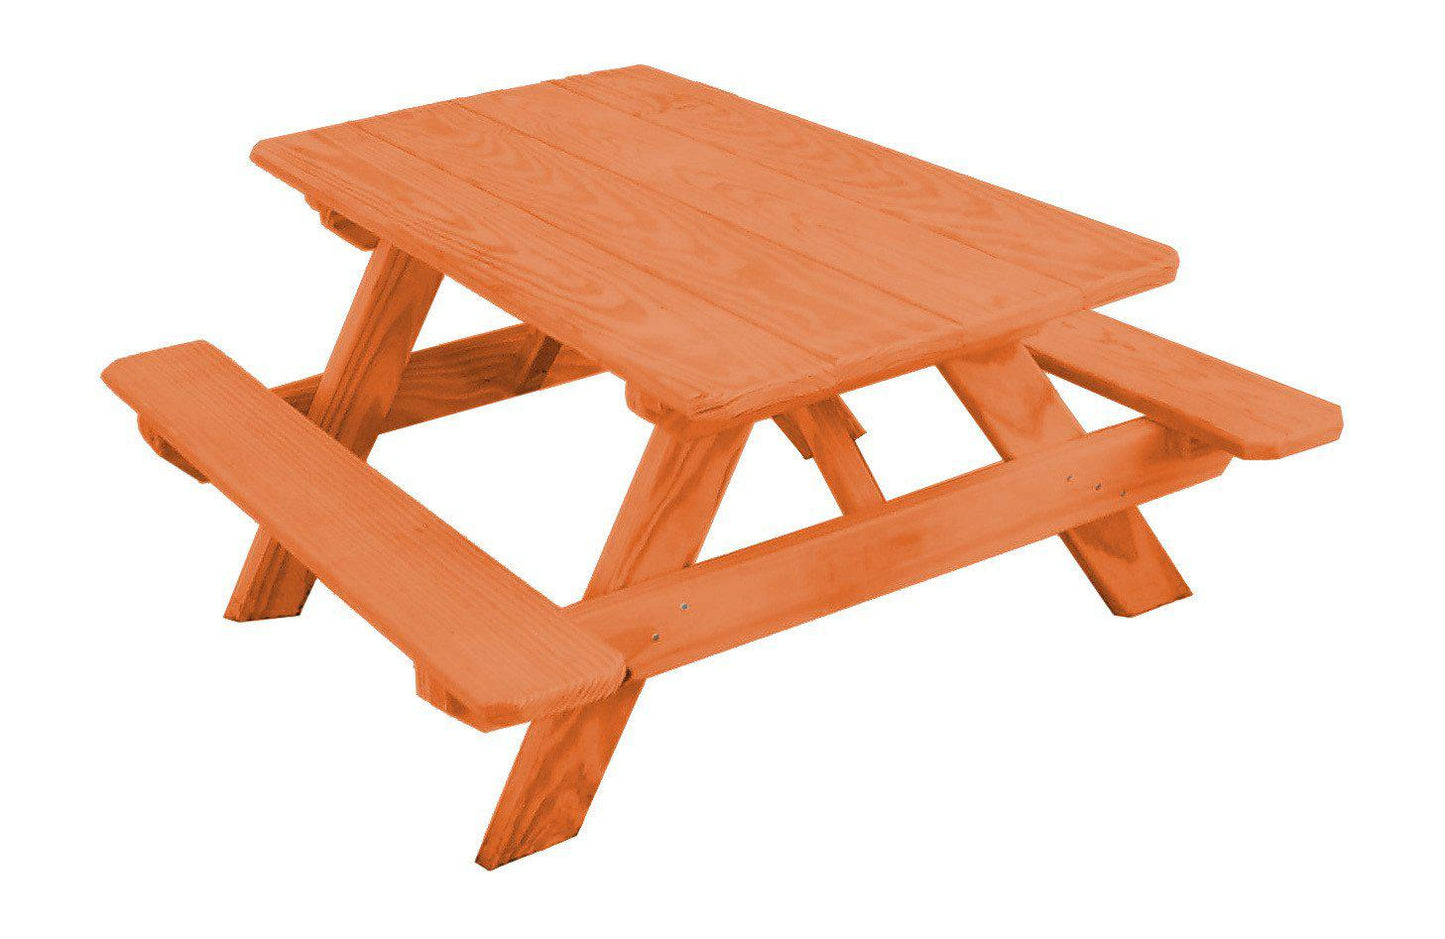 A&L Furniture Co. Pressure Treated Pine 22" Wide Kids Picnic Table - LEAD TIME TO SHIP 10 BUSINESS DAYS